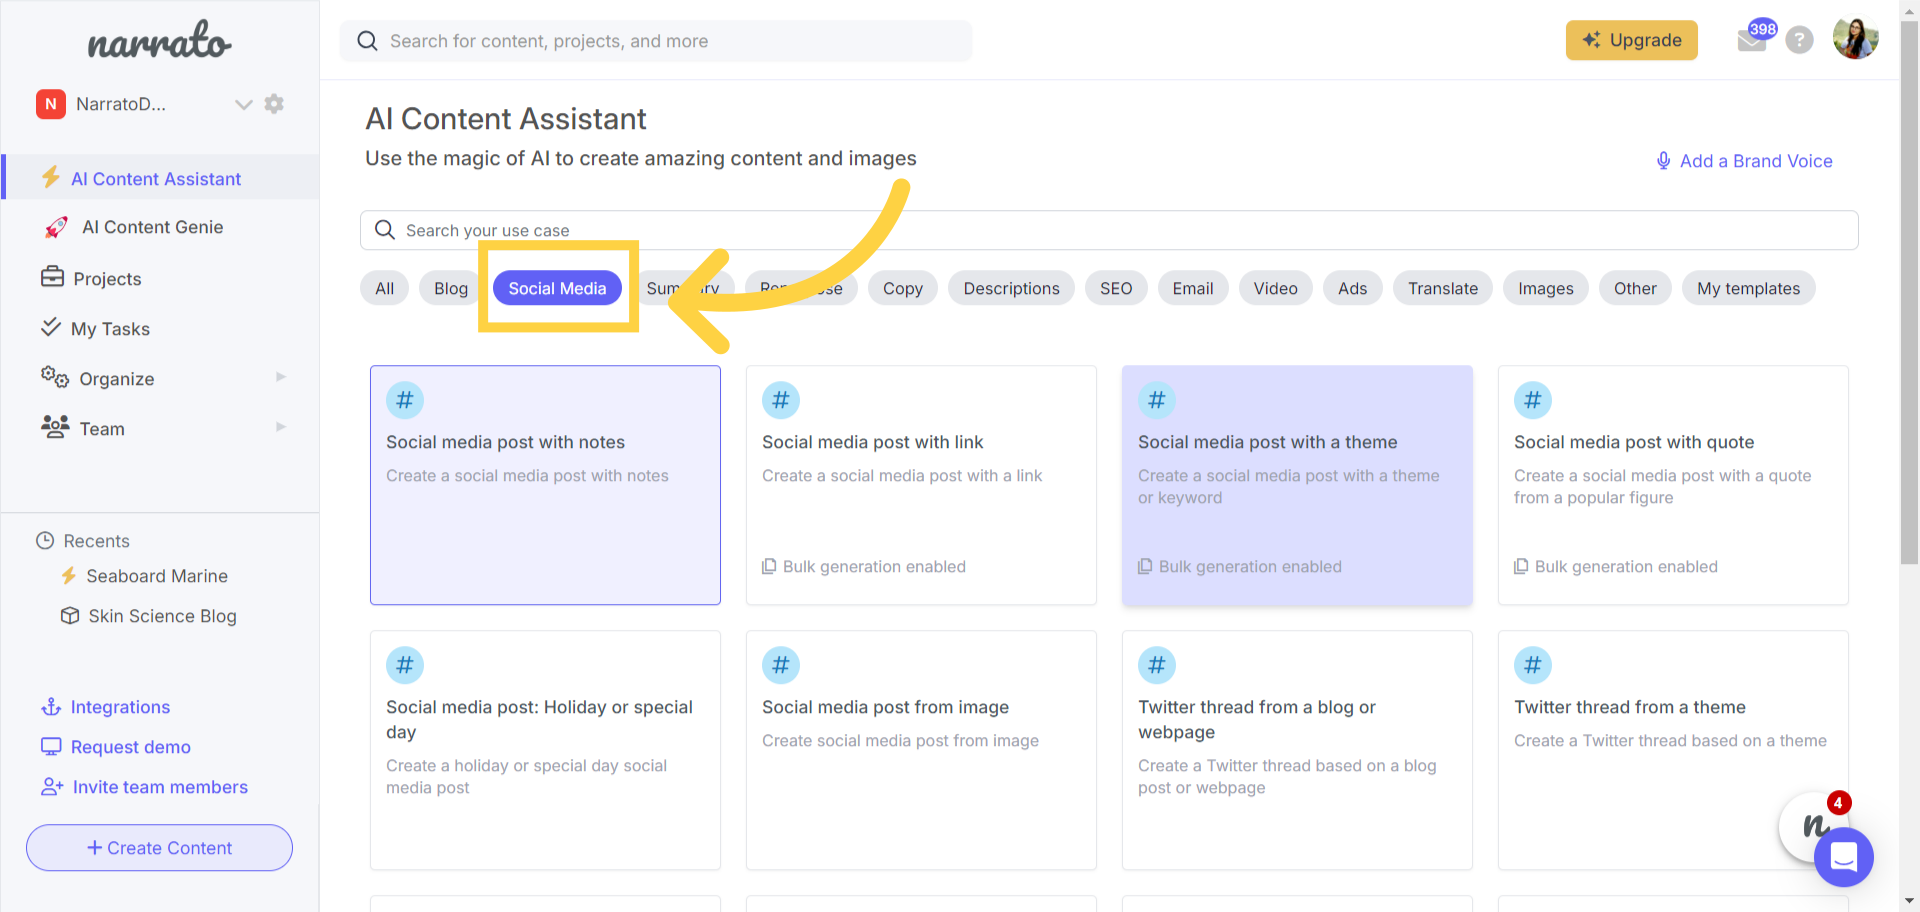 Content categories in AI Content Assistant